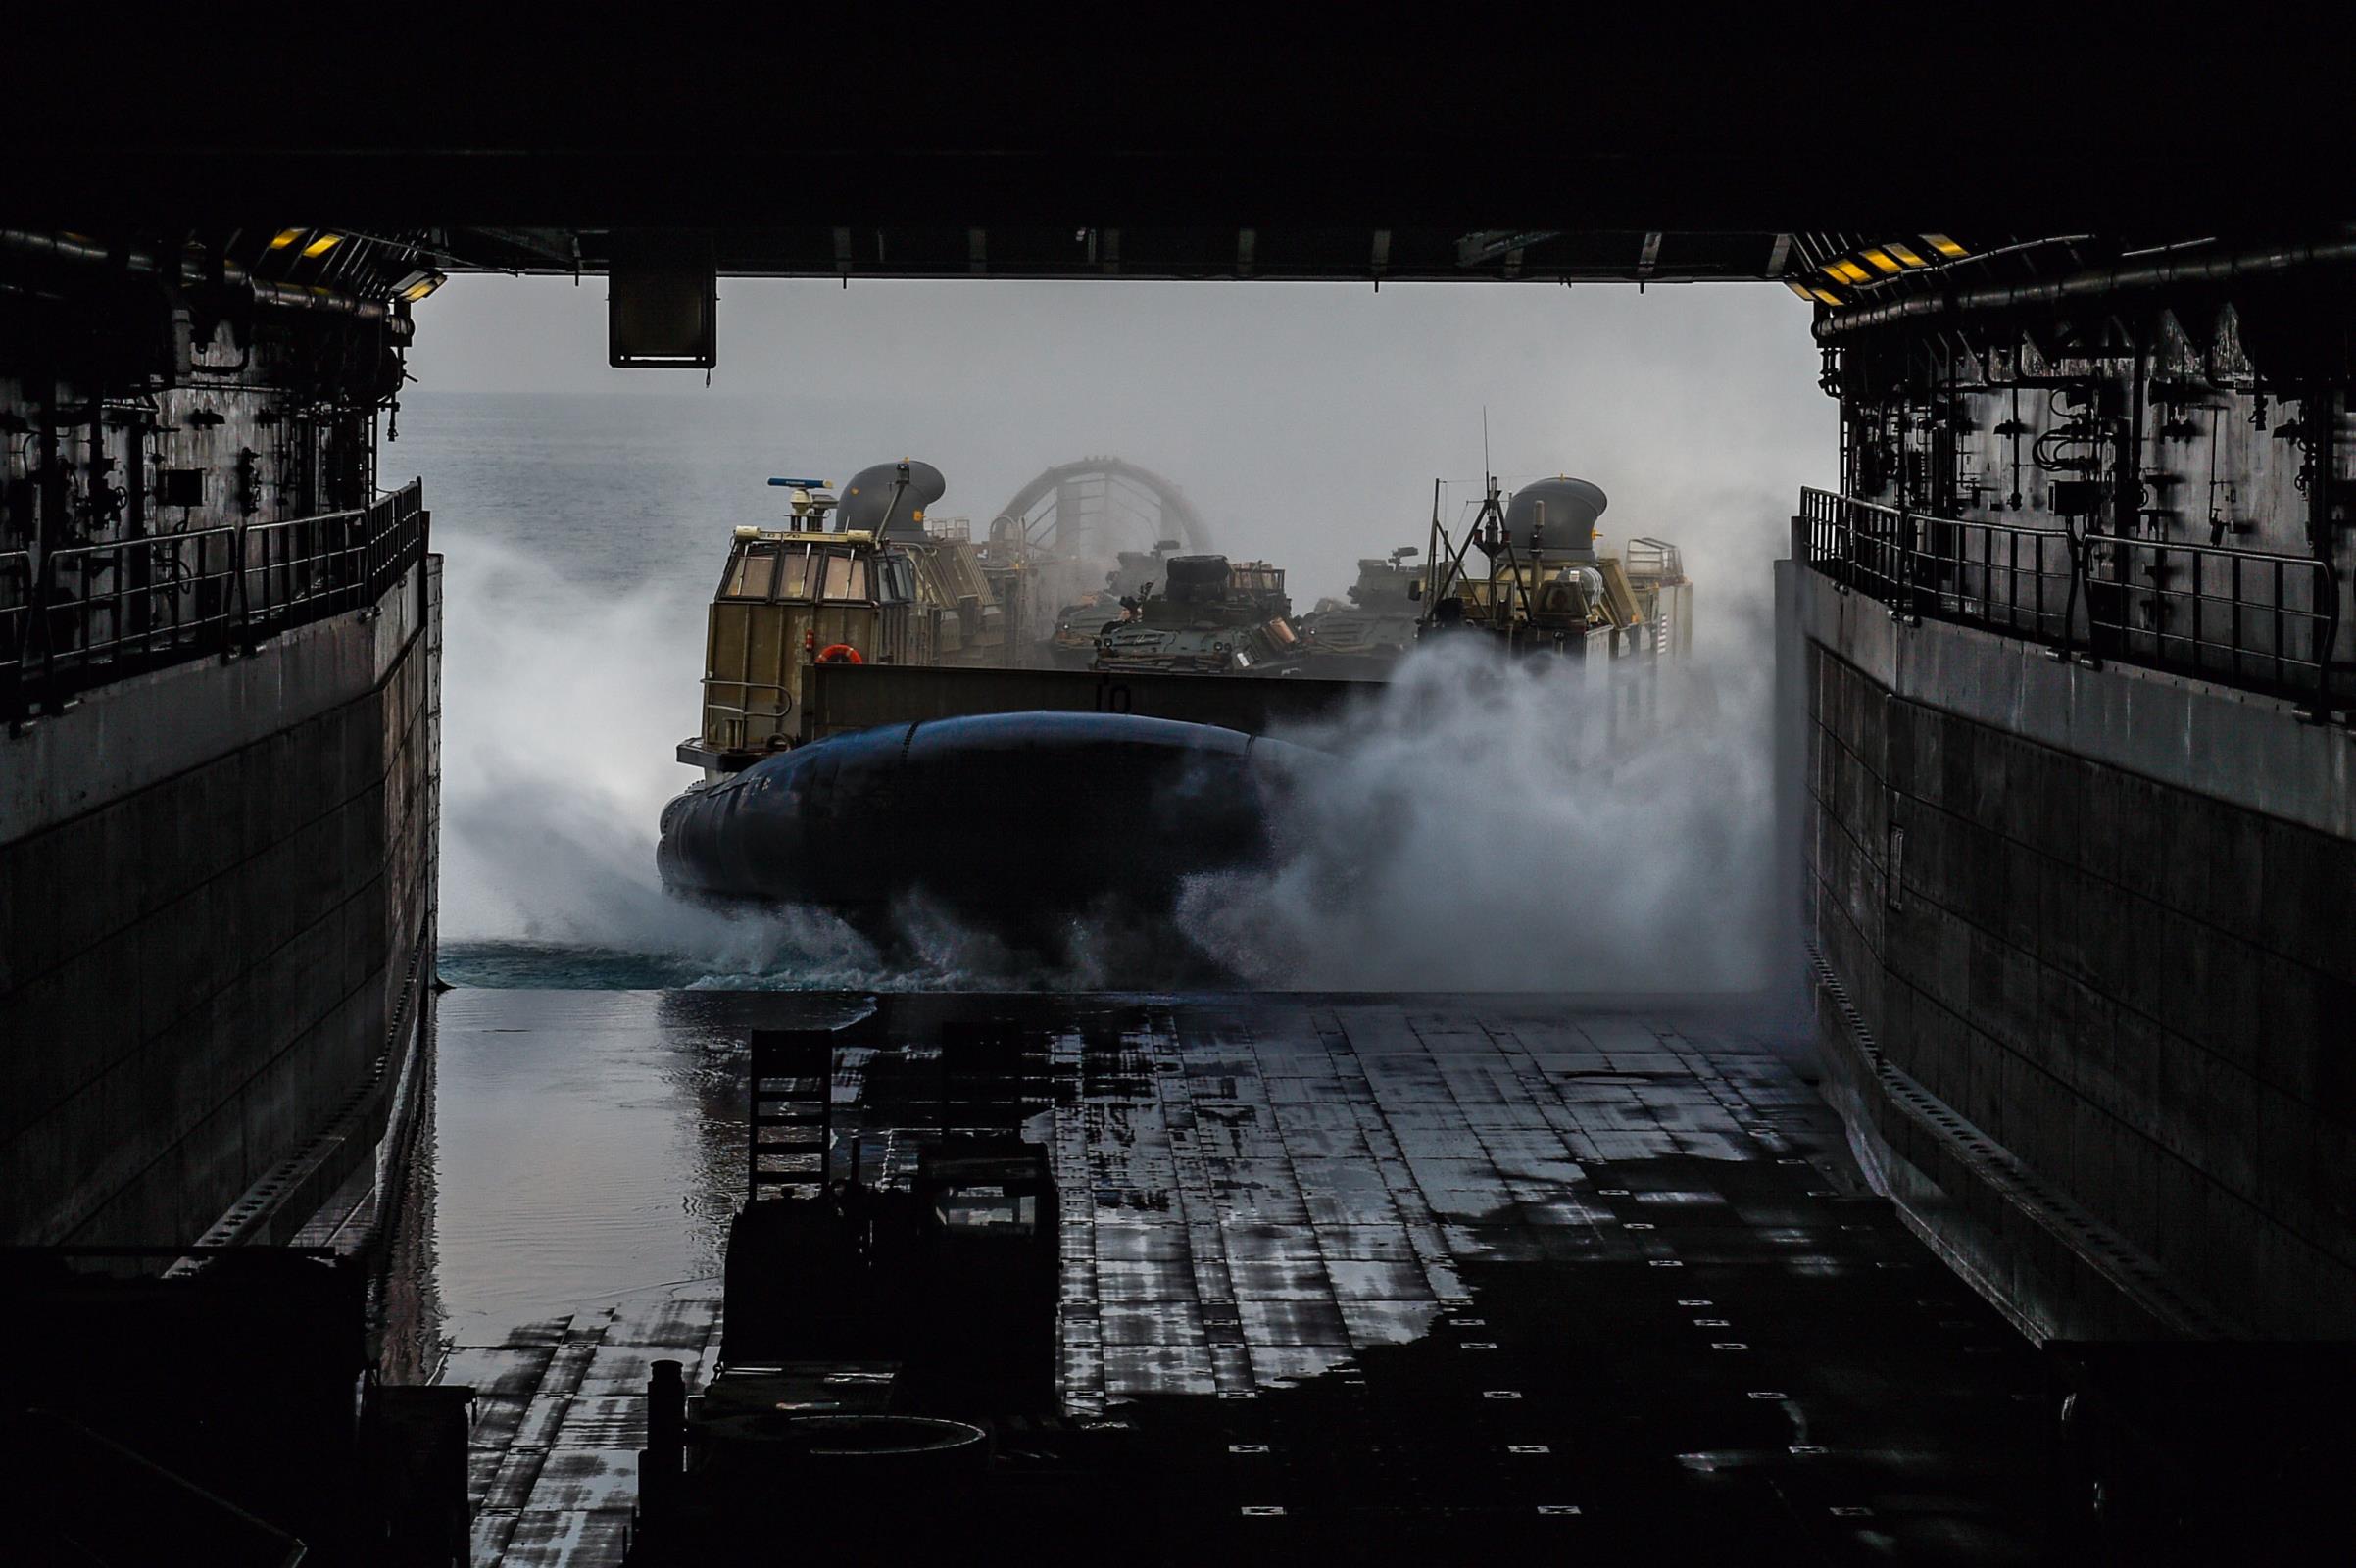 GULF OF THAILAND (Feb. 28, 2022) A landing craft, air cushion (LCAC) enters the well deck of the amphibious transport dock ship USS Green Bay (LPD 20) during Cobra Gold 22. (U.S. Navy photo)